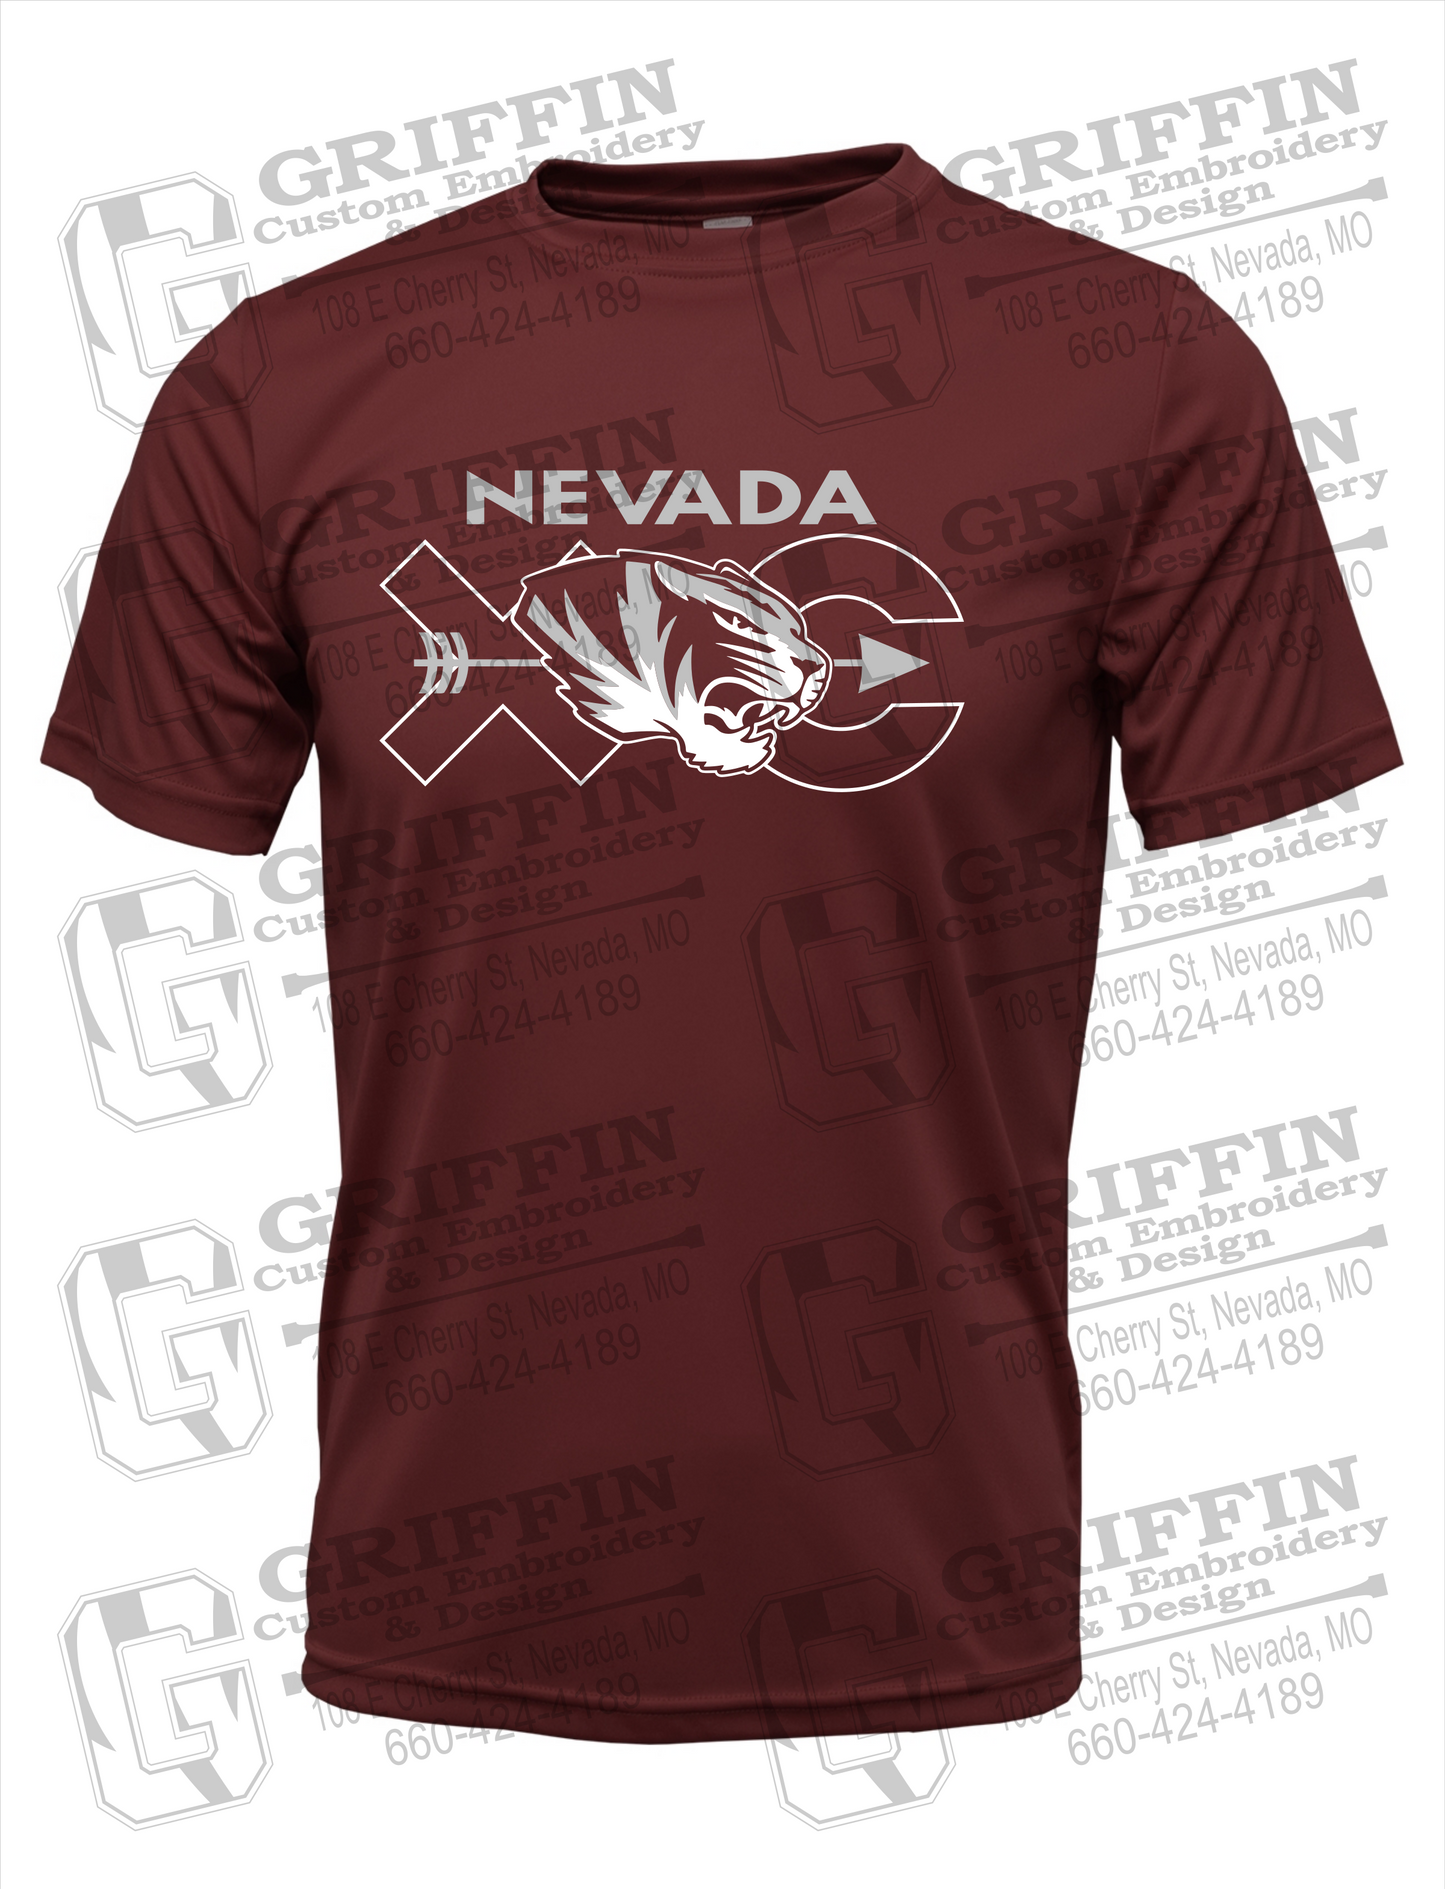 Nevada Tigers 23-T Dry-Fit T-Shirt - Cross Country